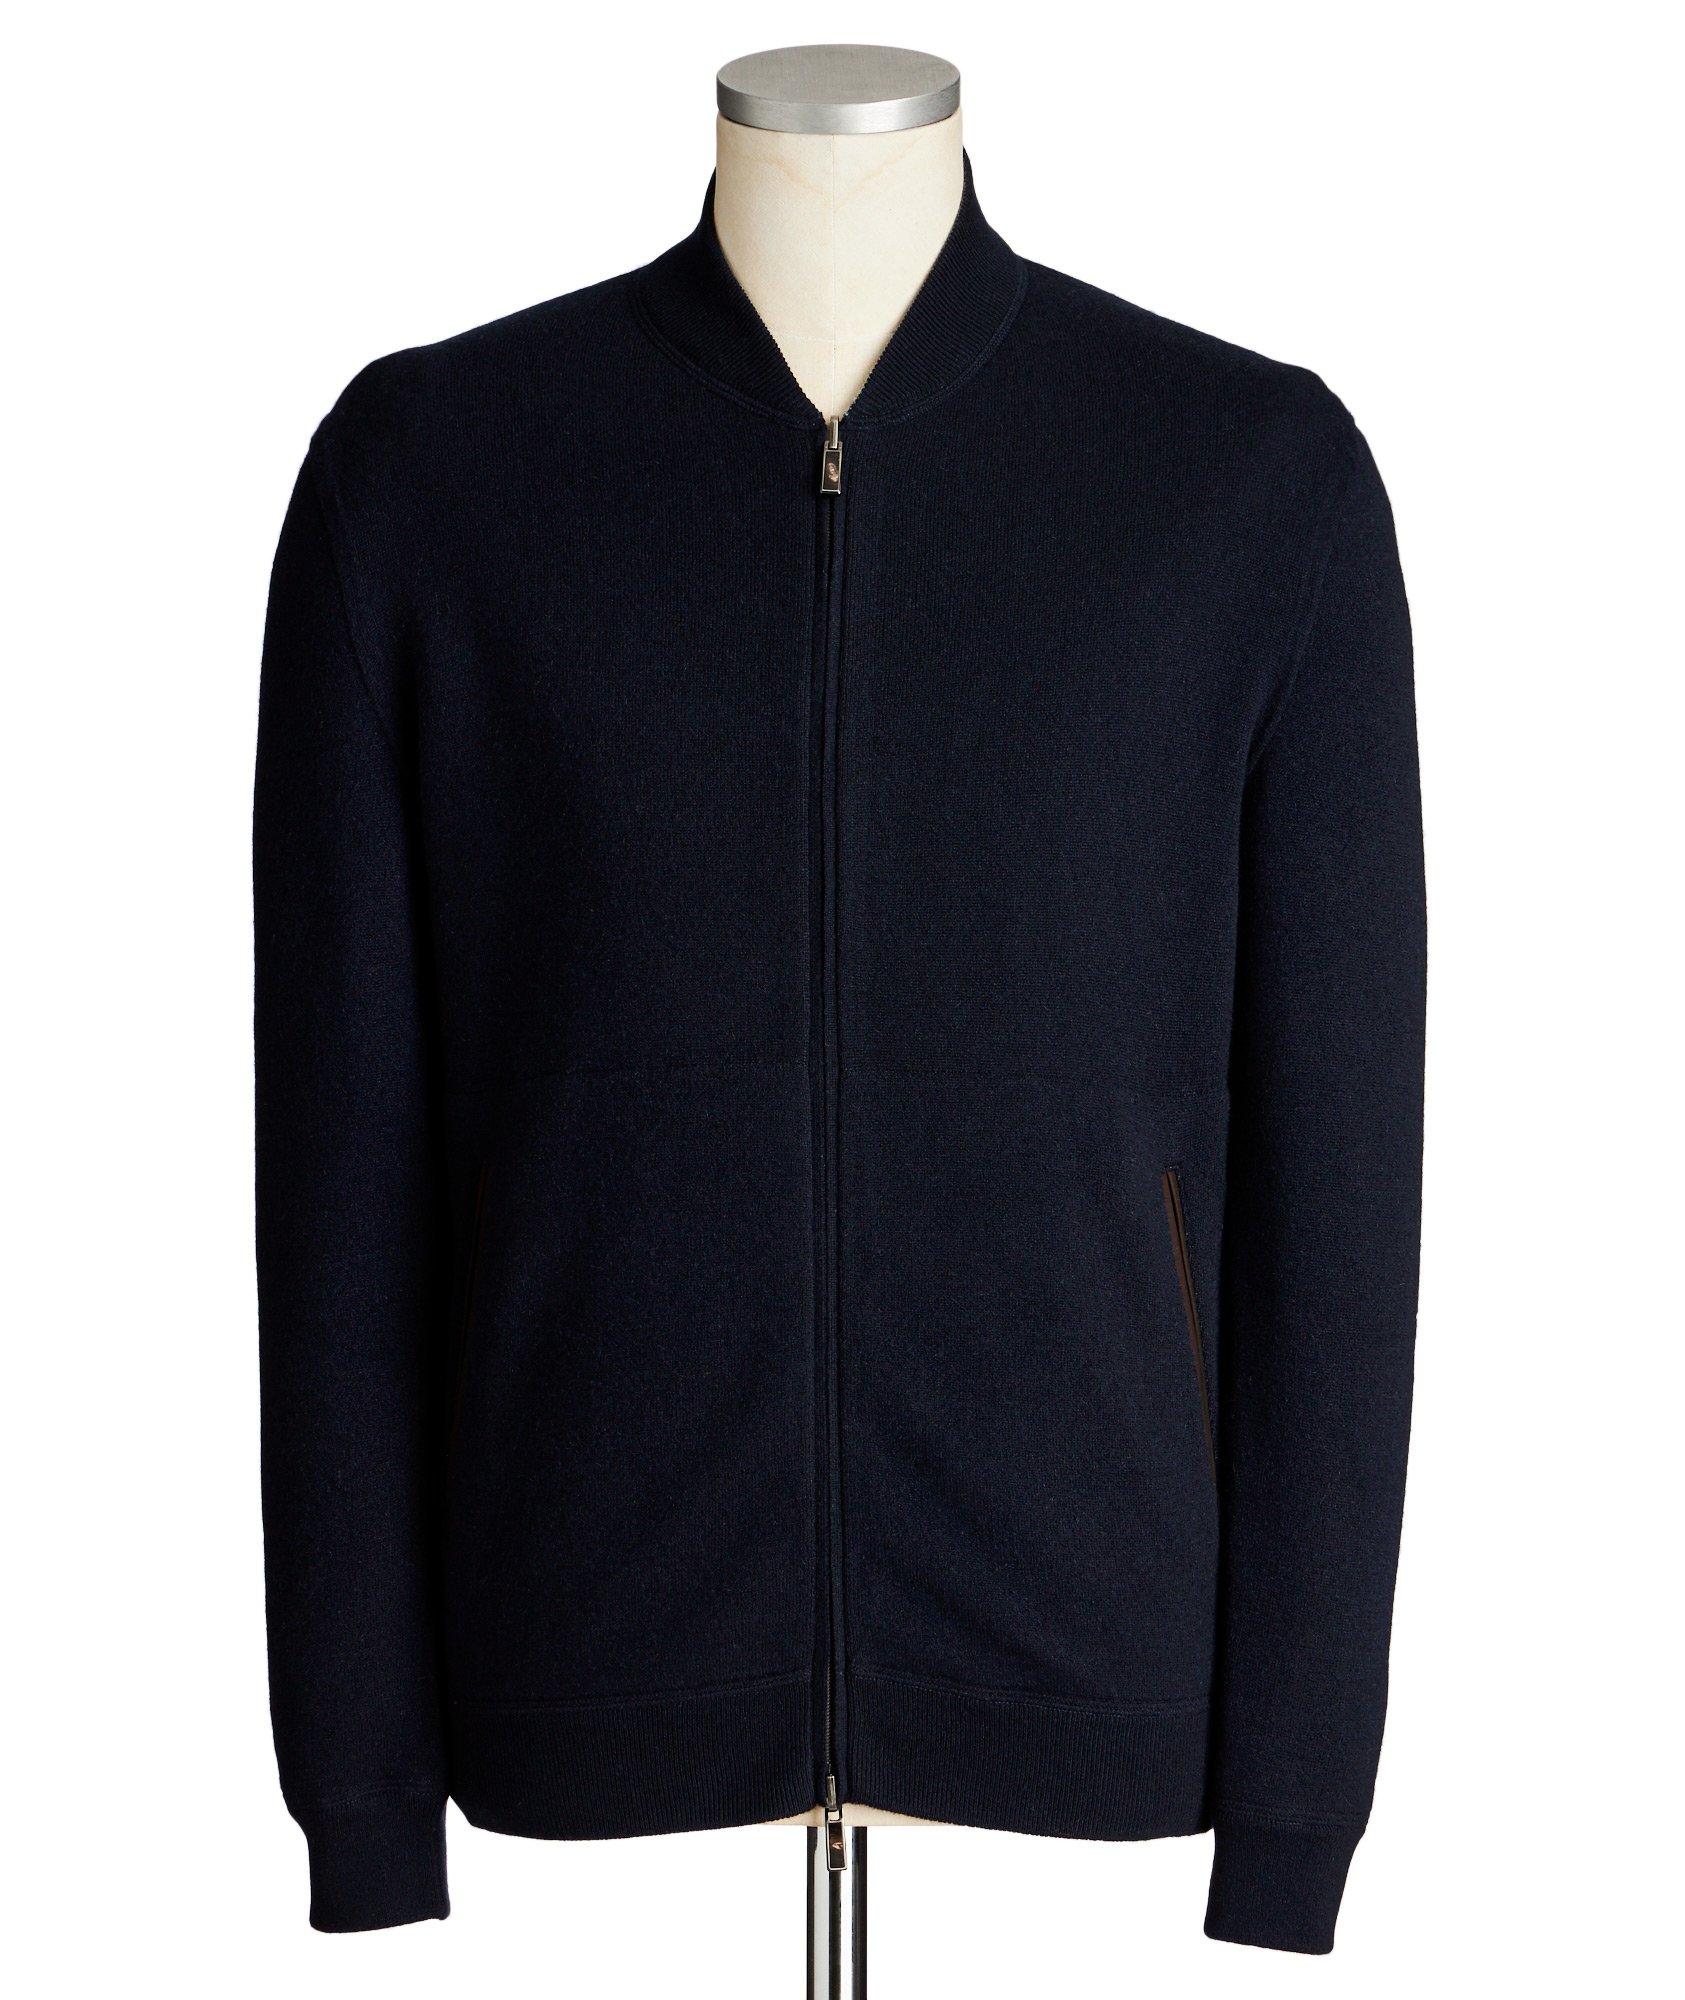 Reversible Cashmere Zip-Up Sweater image 0